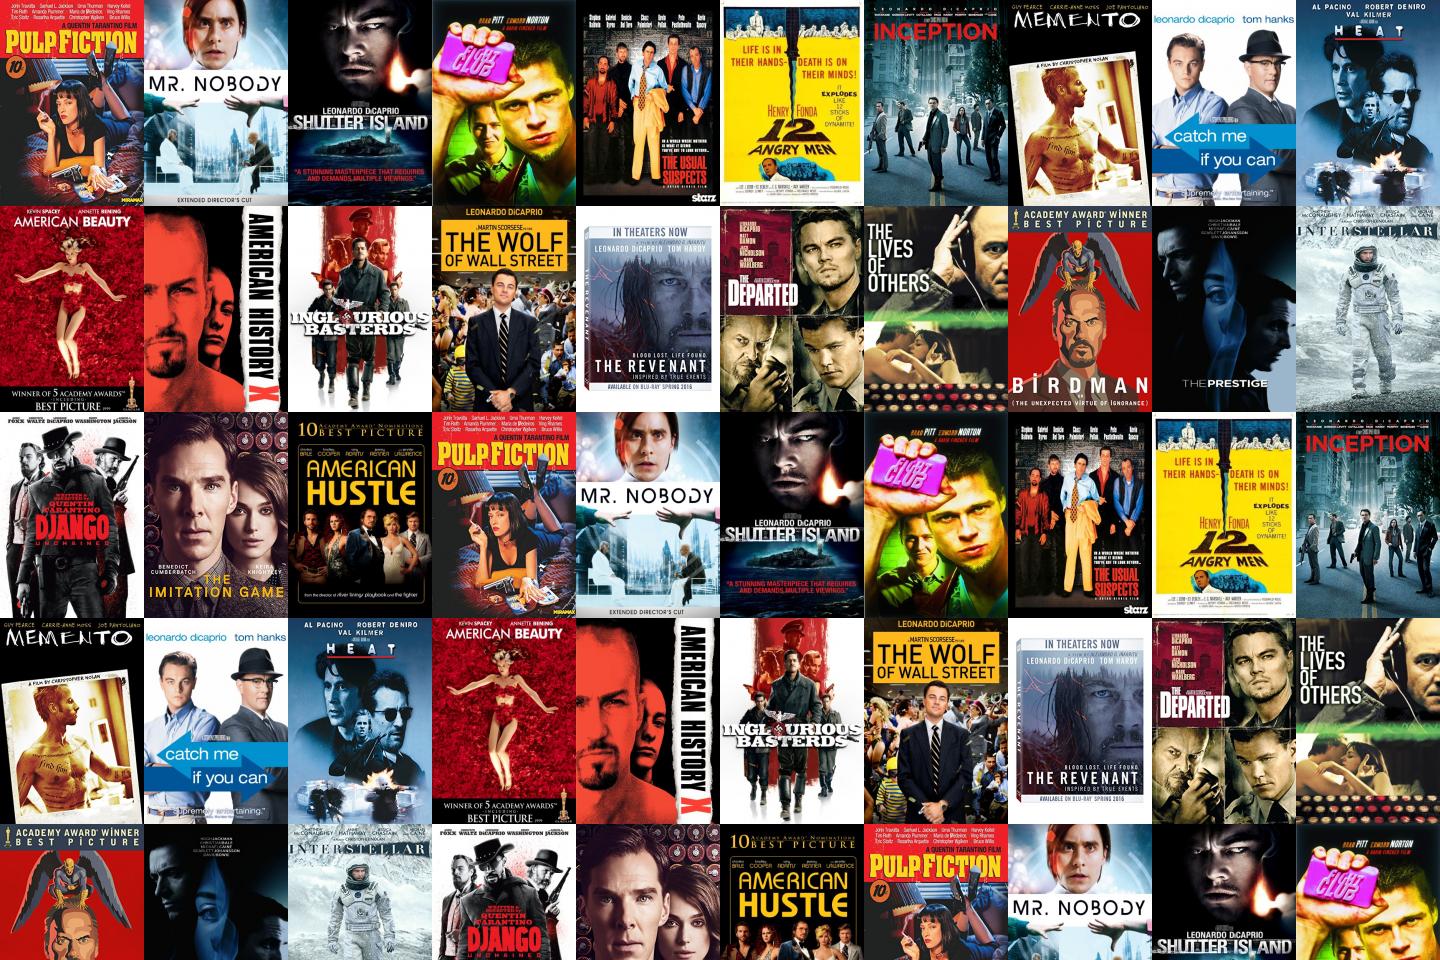 Download This Free Wallpaper With Images Of Pulp Fiction, - 12 Angry Men , HD Wallpaper & Backgrounds